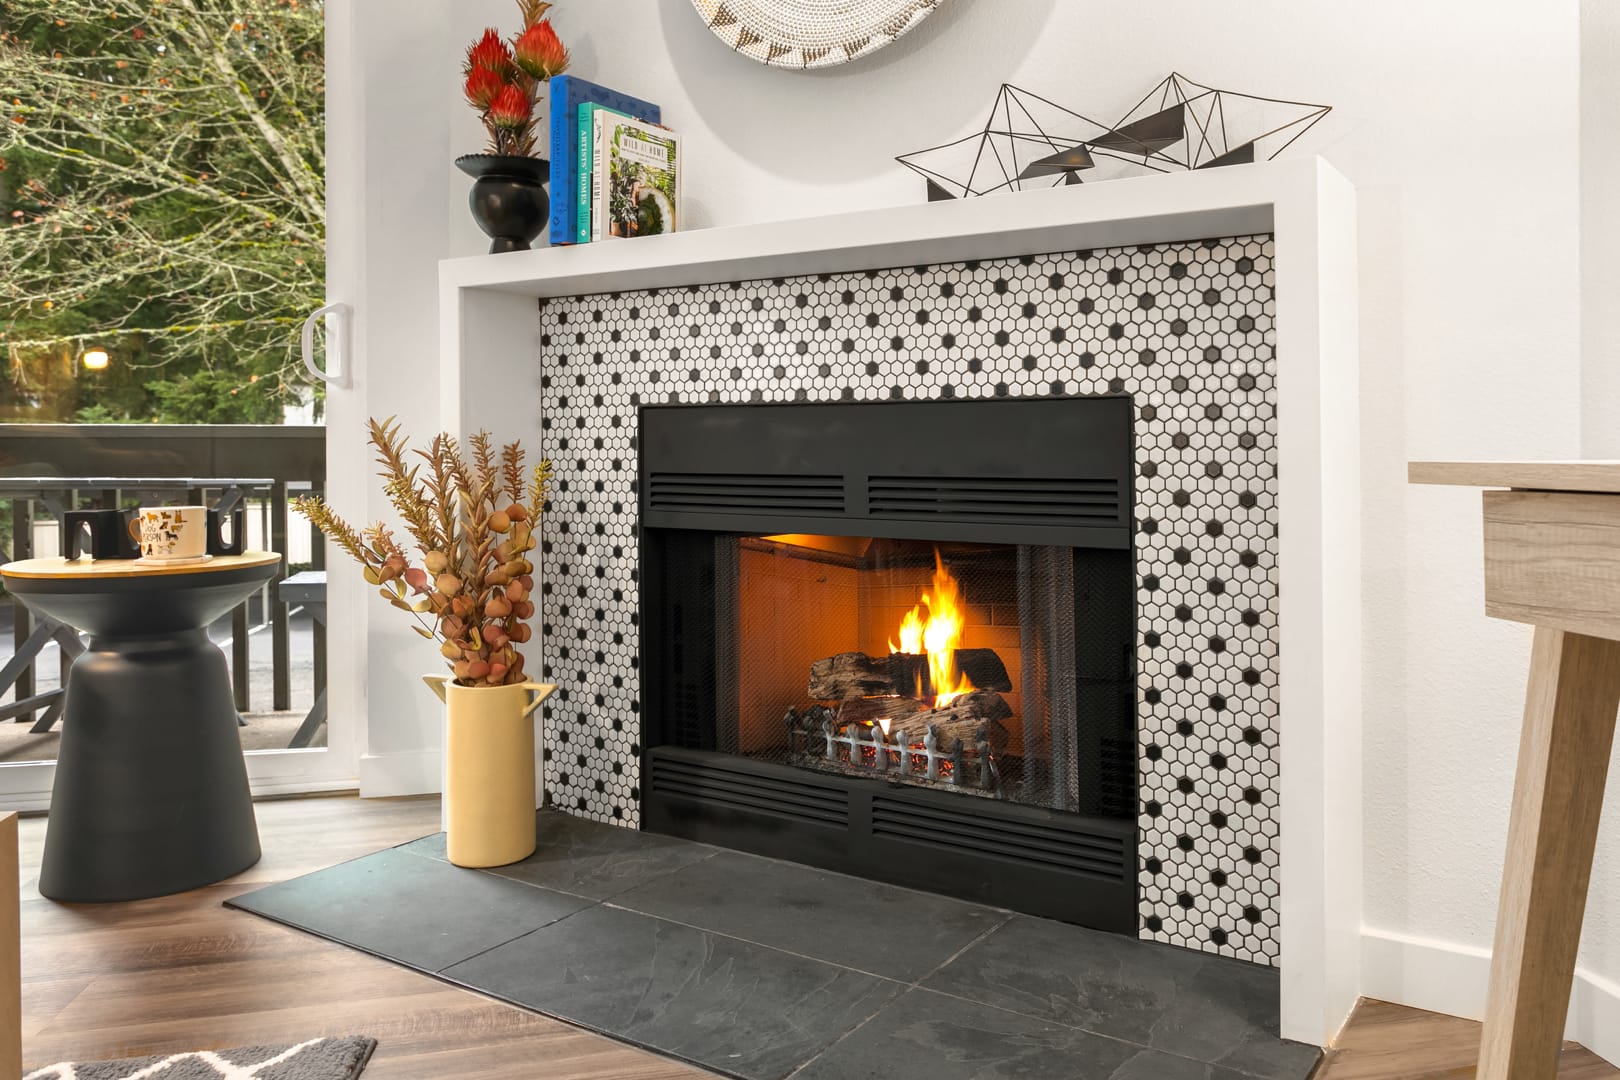 Close up view of the black and white geometric tiled fireplace